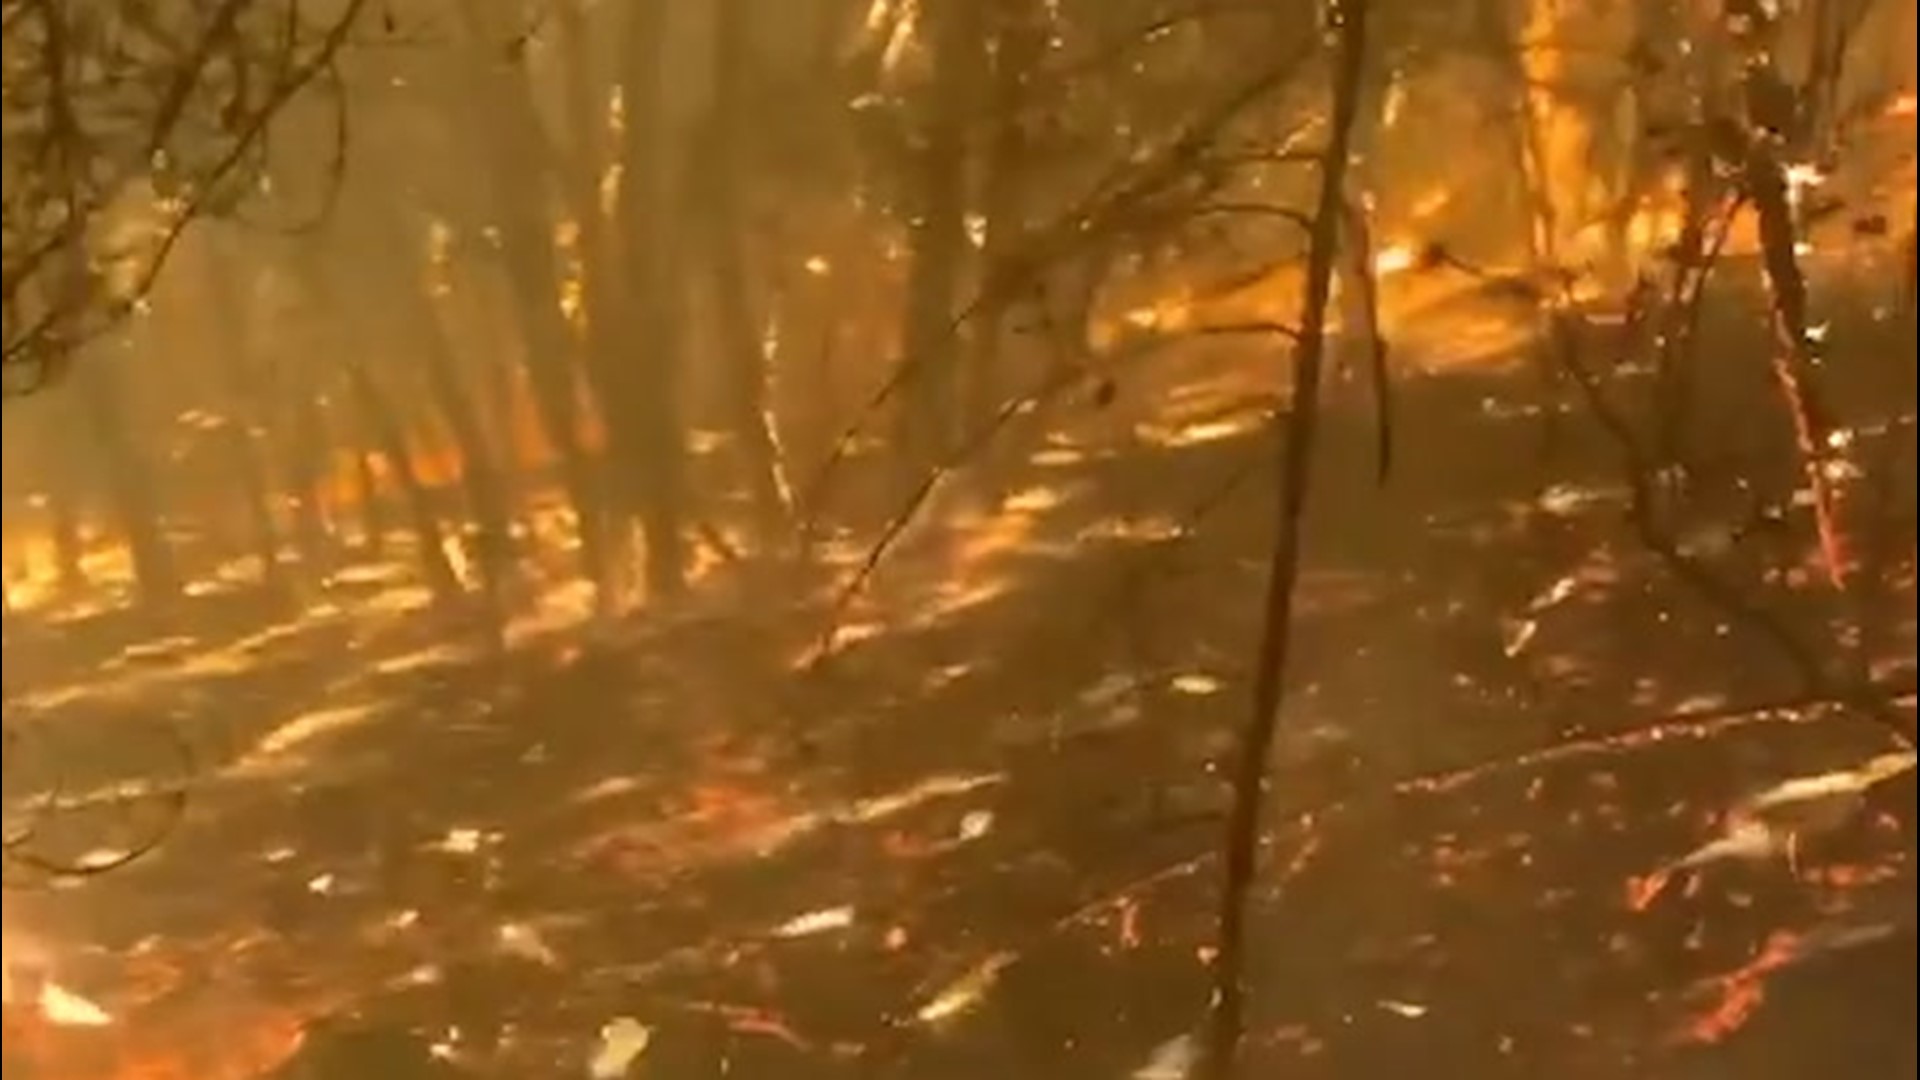 Firefighters with the Oxnard Fire Department recorded the intense moments as they drove through the Glass Fire in Santa Rosa, California, on Sept. 29. The fire has scorched tens of thousands of acres and forced more than 70,000 people to evacuate.